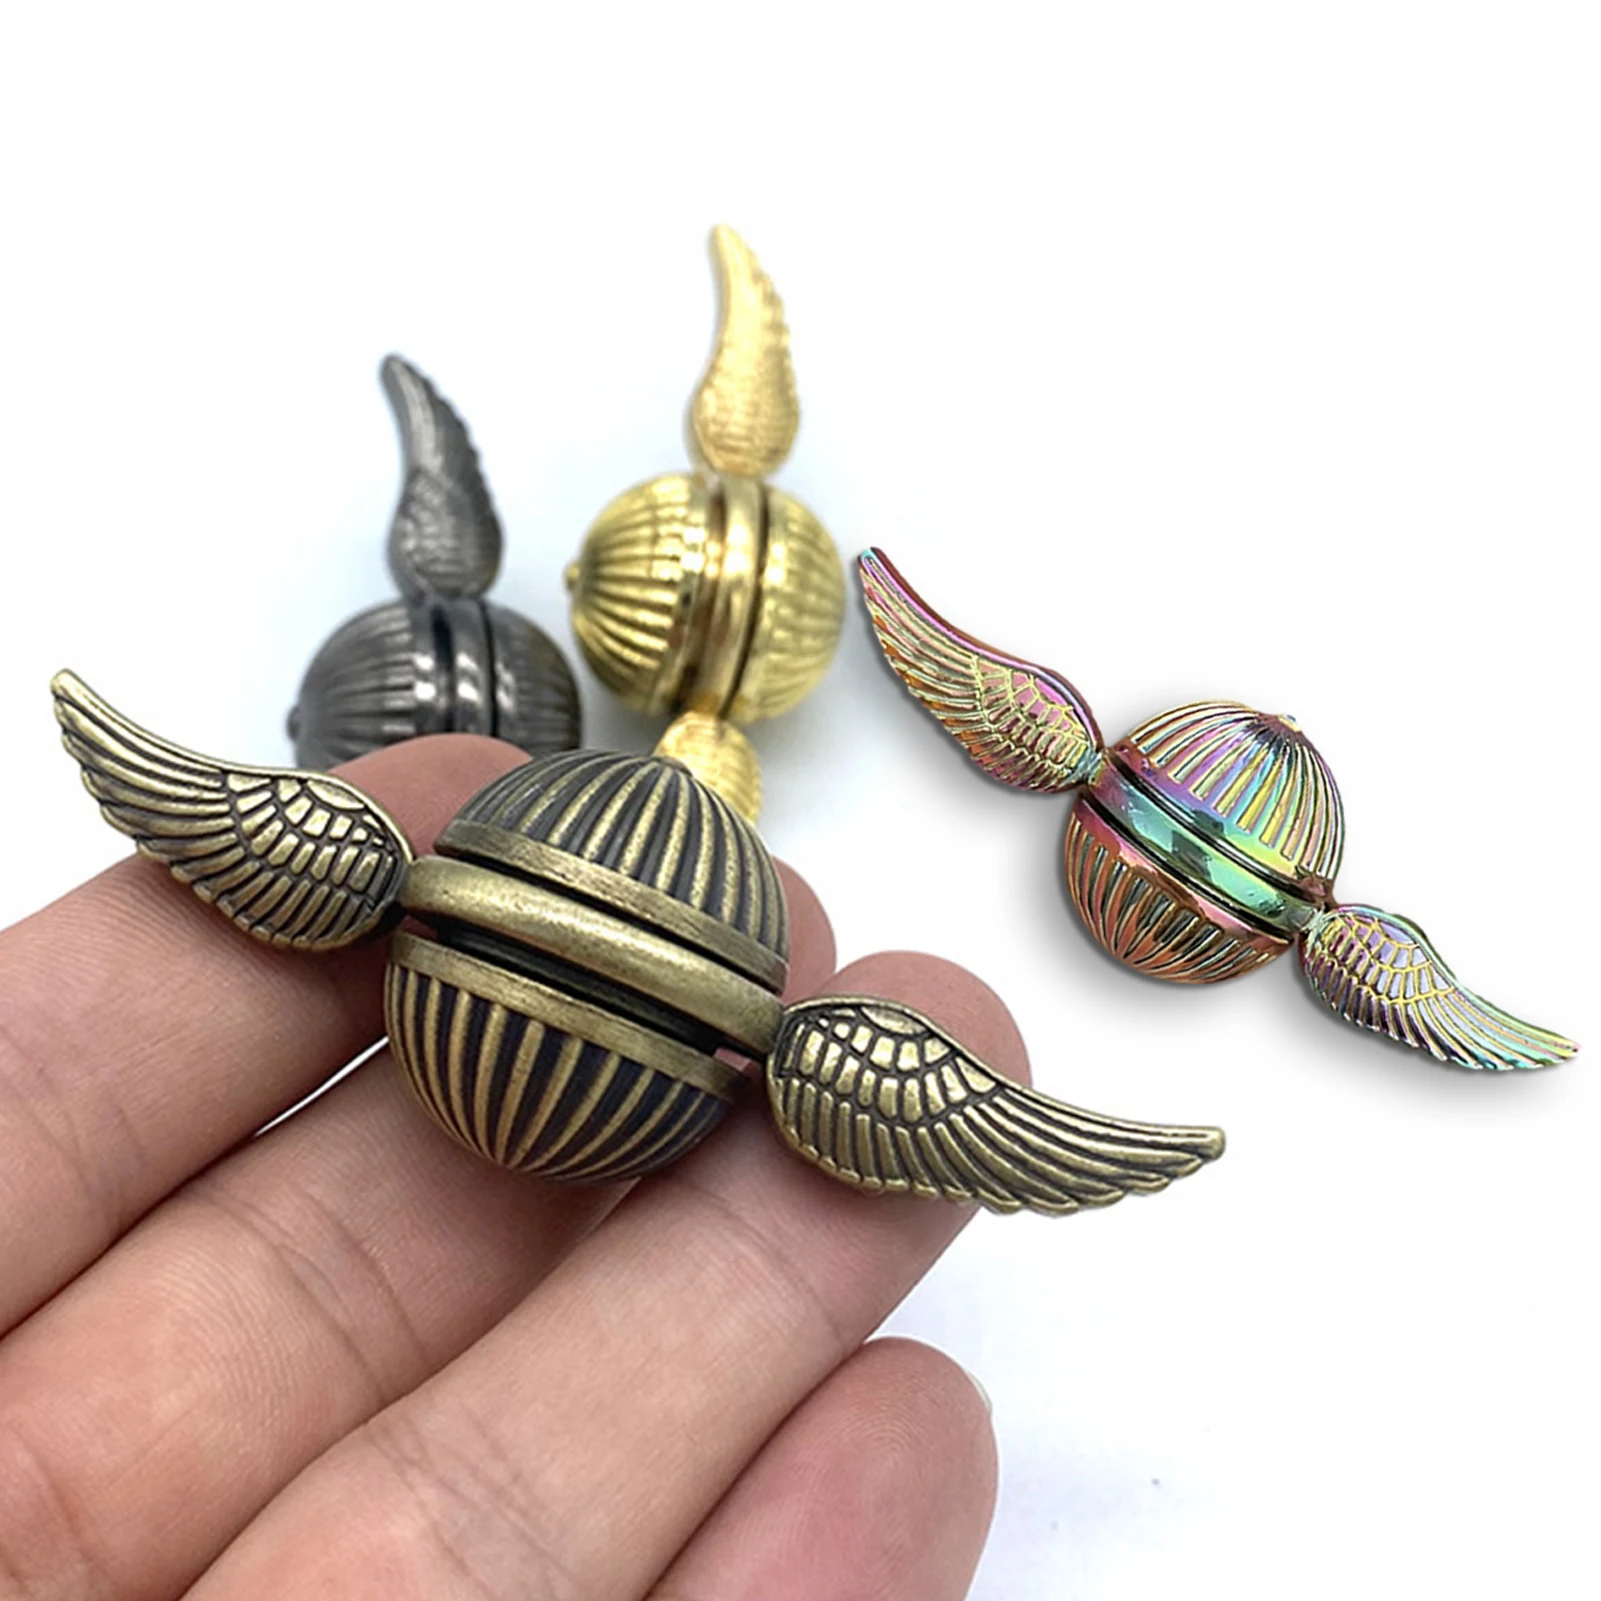 

Golden Snitch Fidget Spinner Anti-Stress Fidget Toy Finger Dynamic Changing Gyro Stress Anxiety ADHD Relief Figets Toy